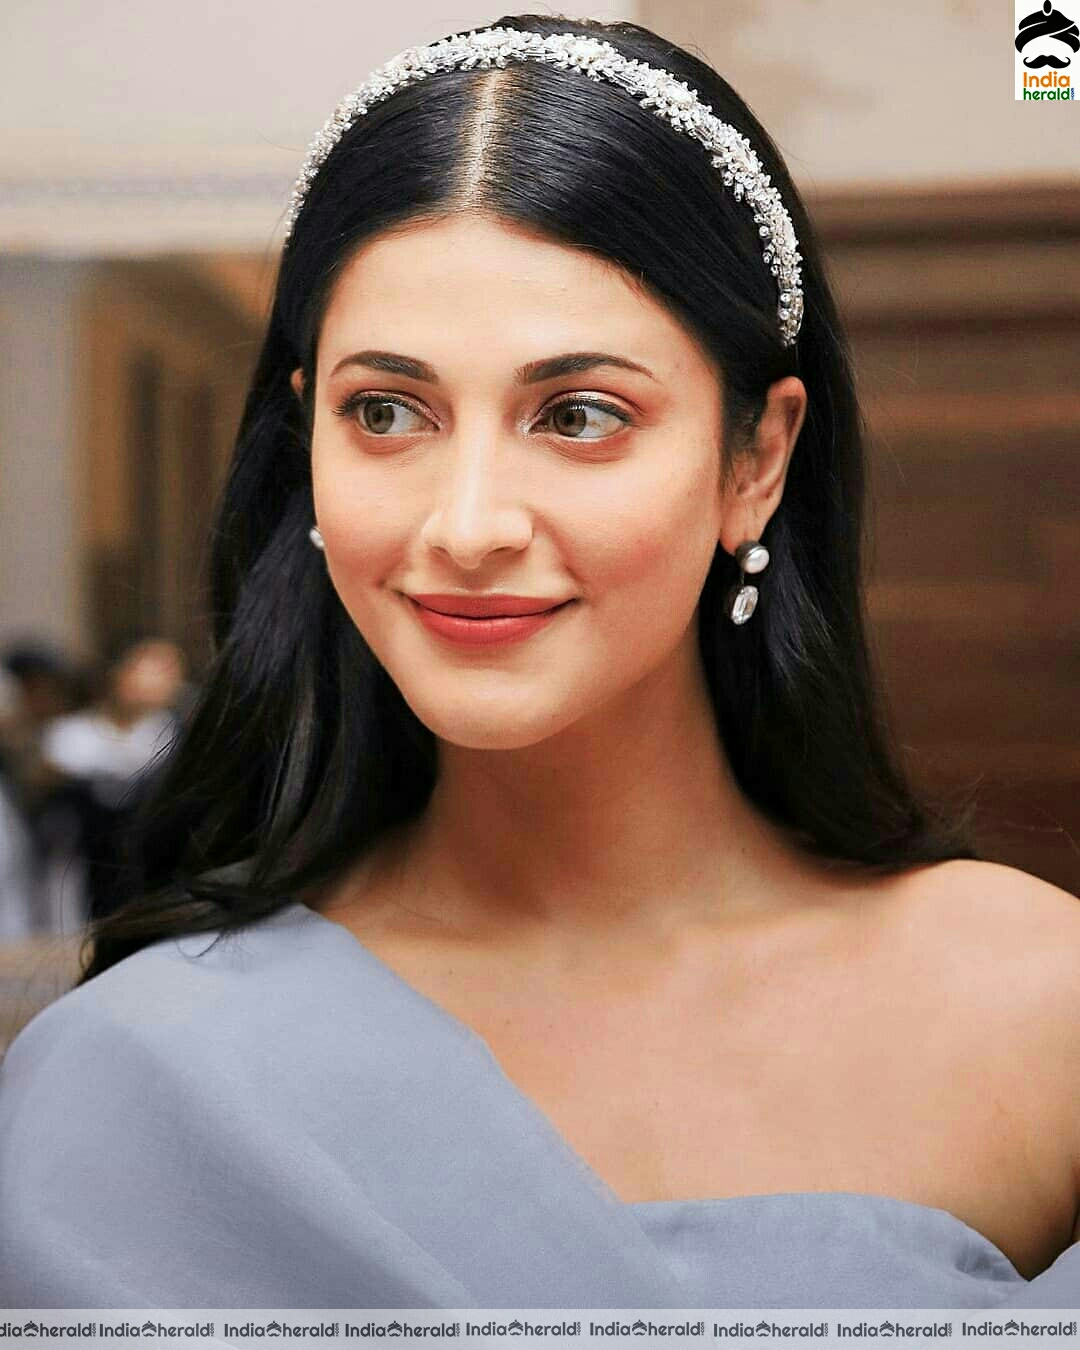 Shruti Hassan looking angelic and pretty in these photos